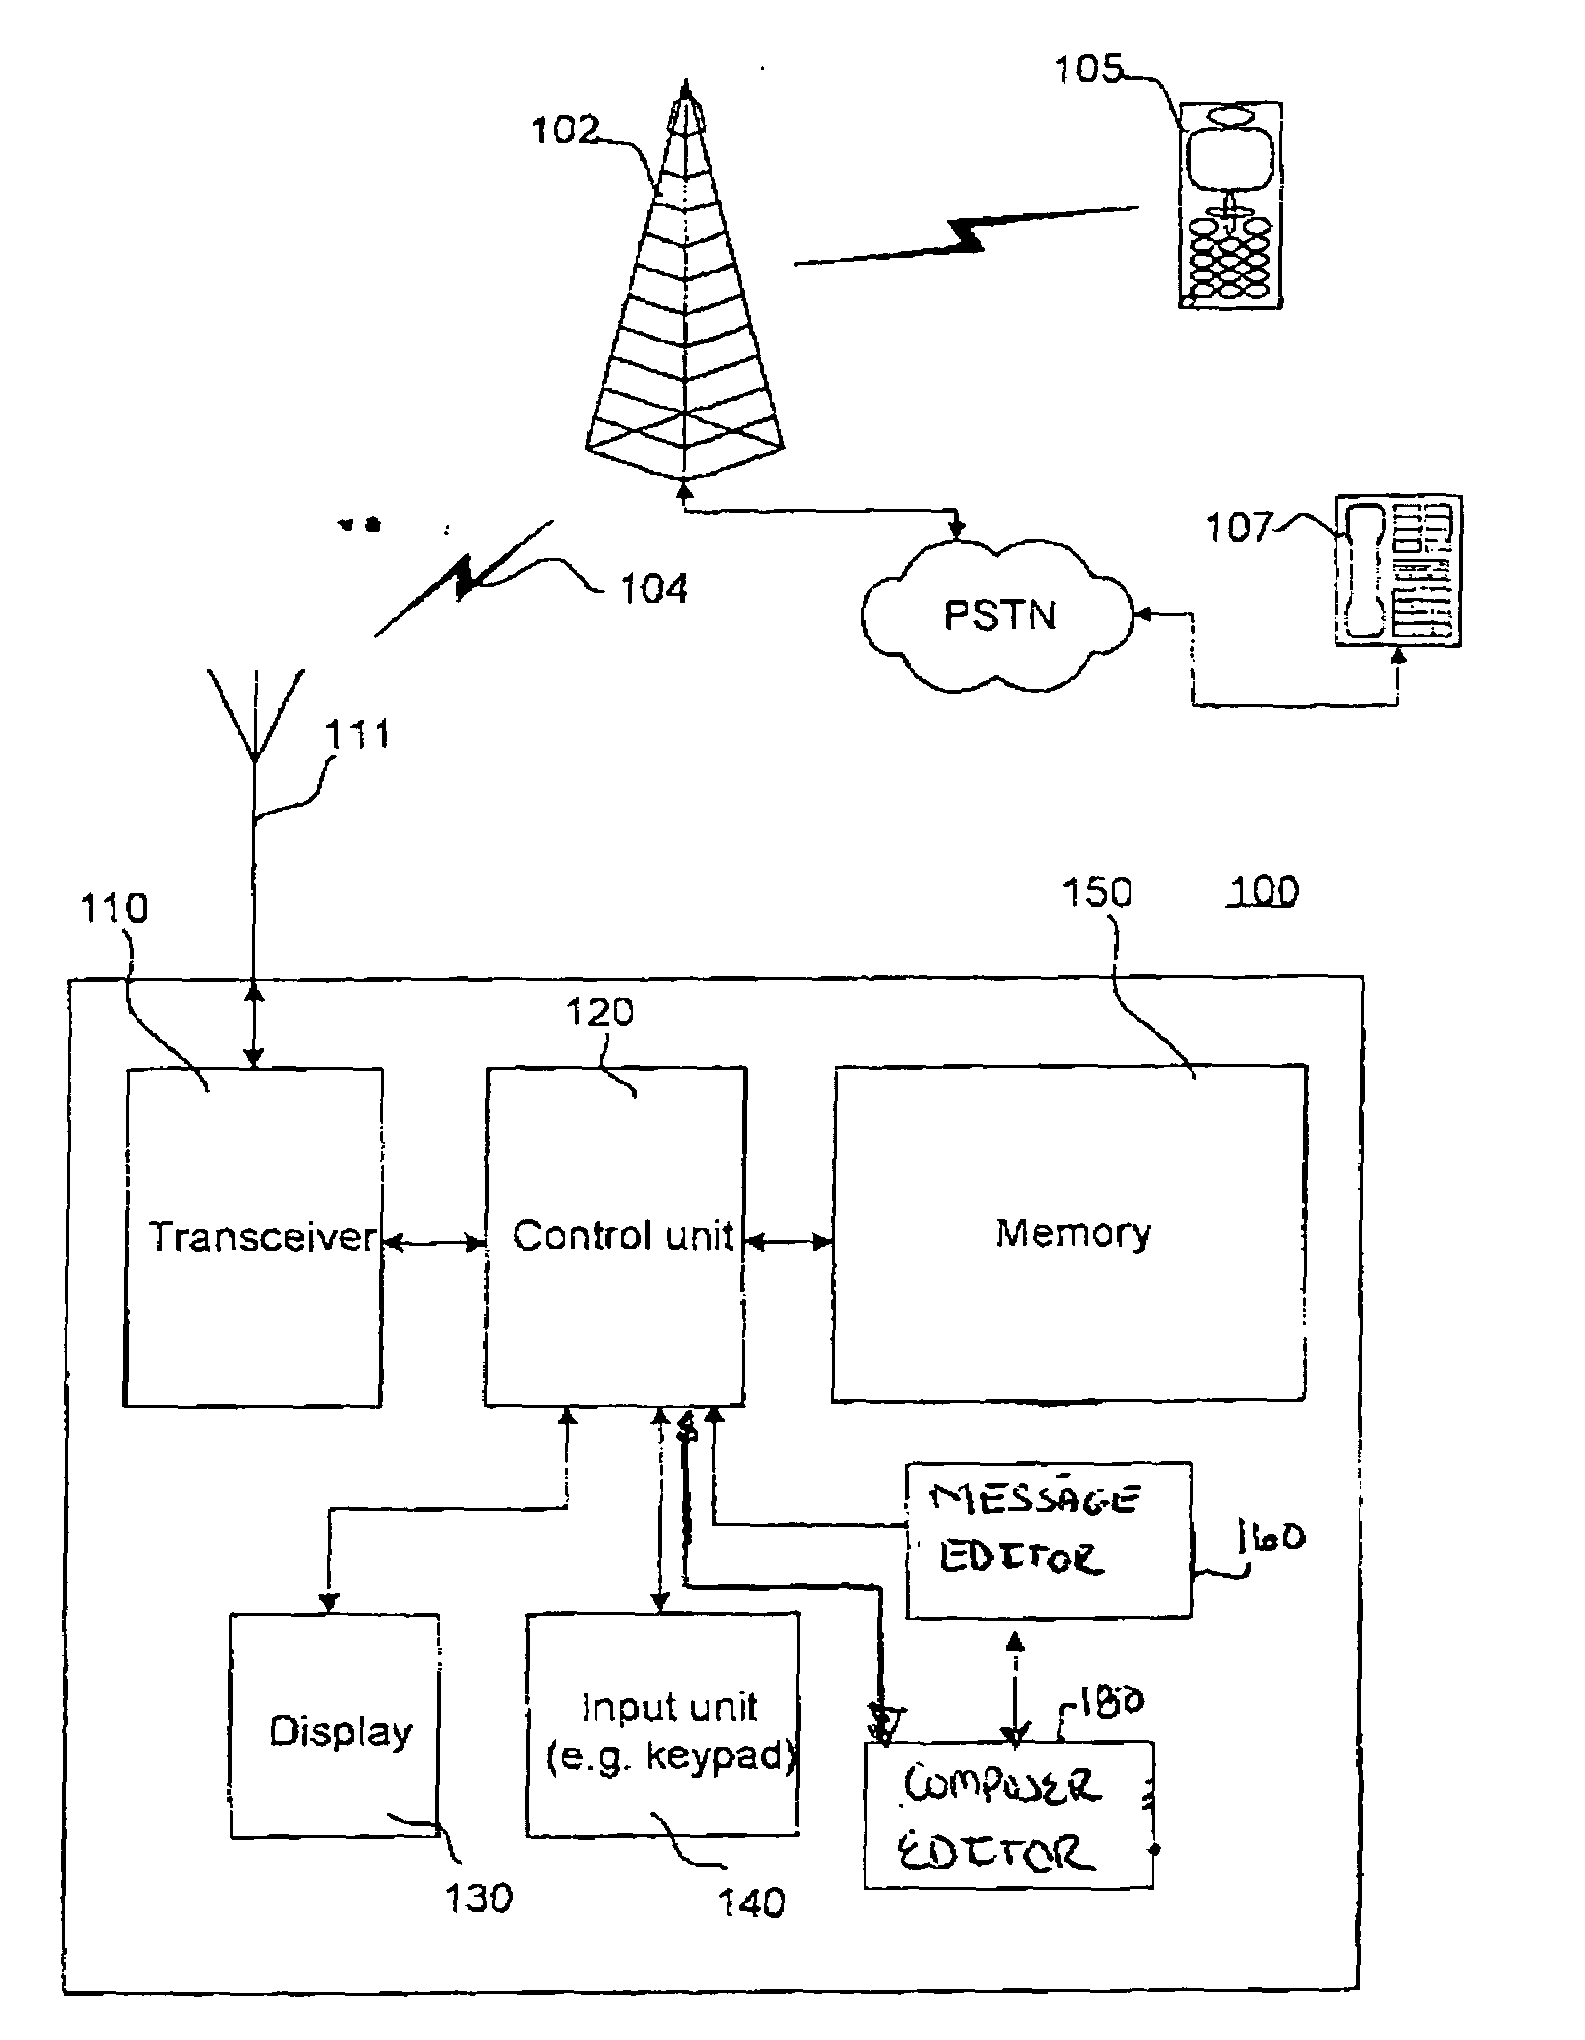 Method and apparatus for music enhanced messaging